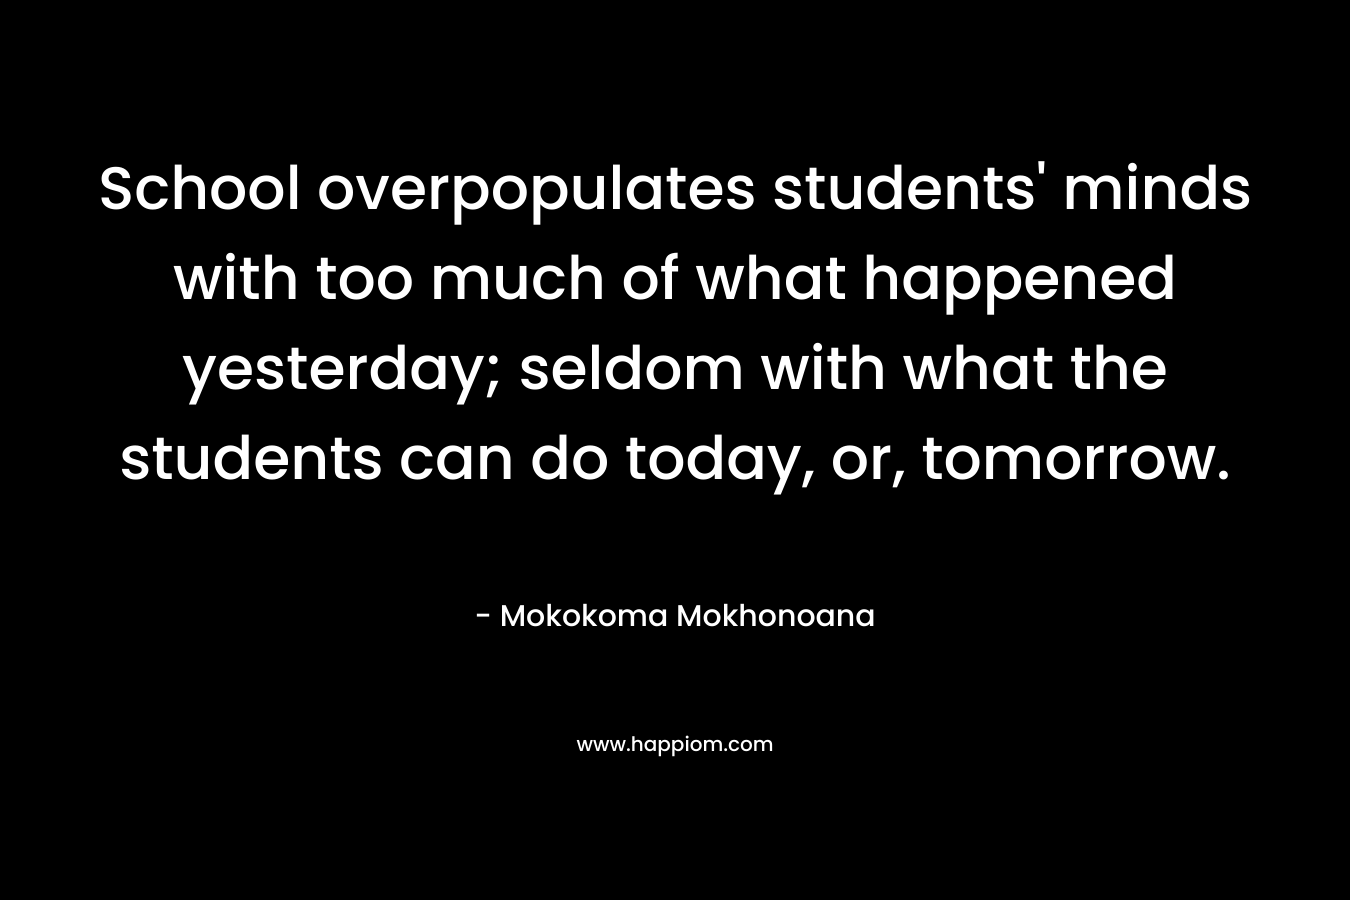 School overpopulates students’ minds with too much of what happened yesterday; seldom with what the students can do today, or, tomorrow. – Mokokoma Mokhonoana